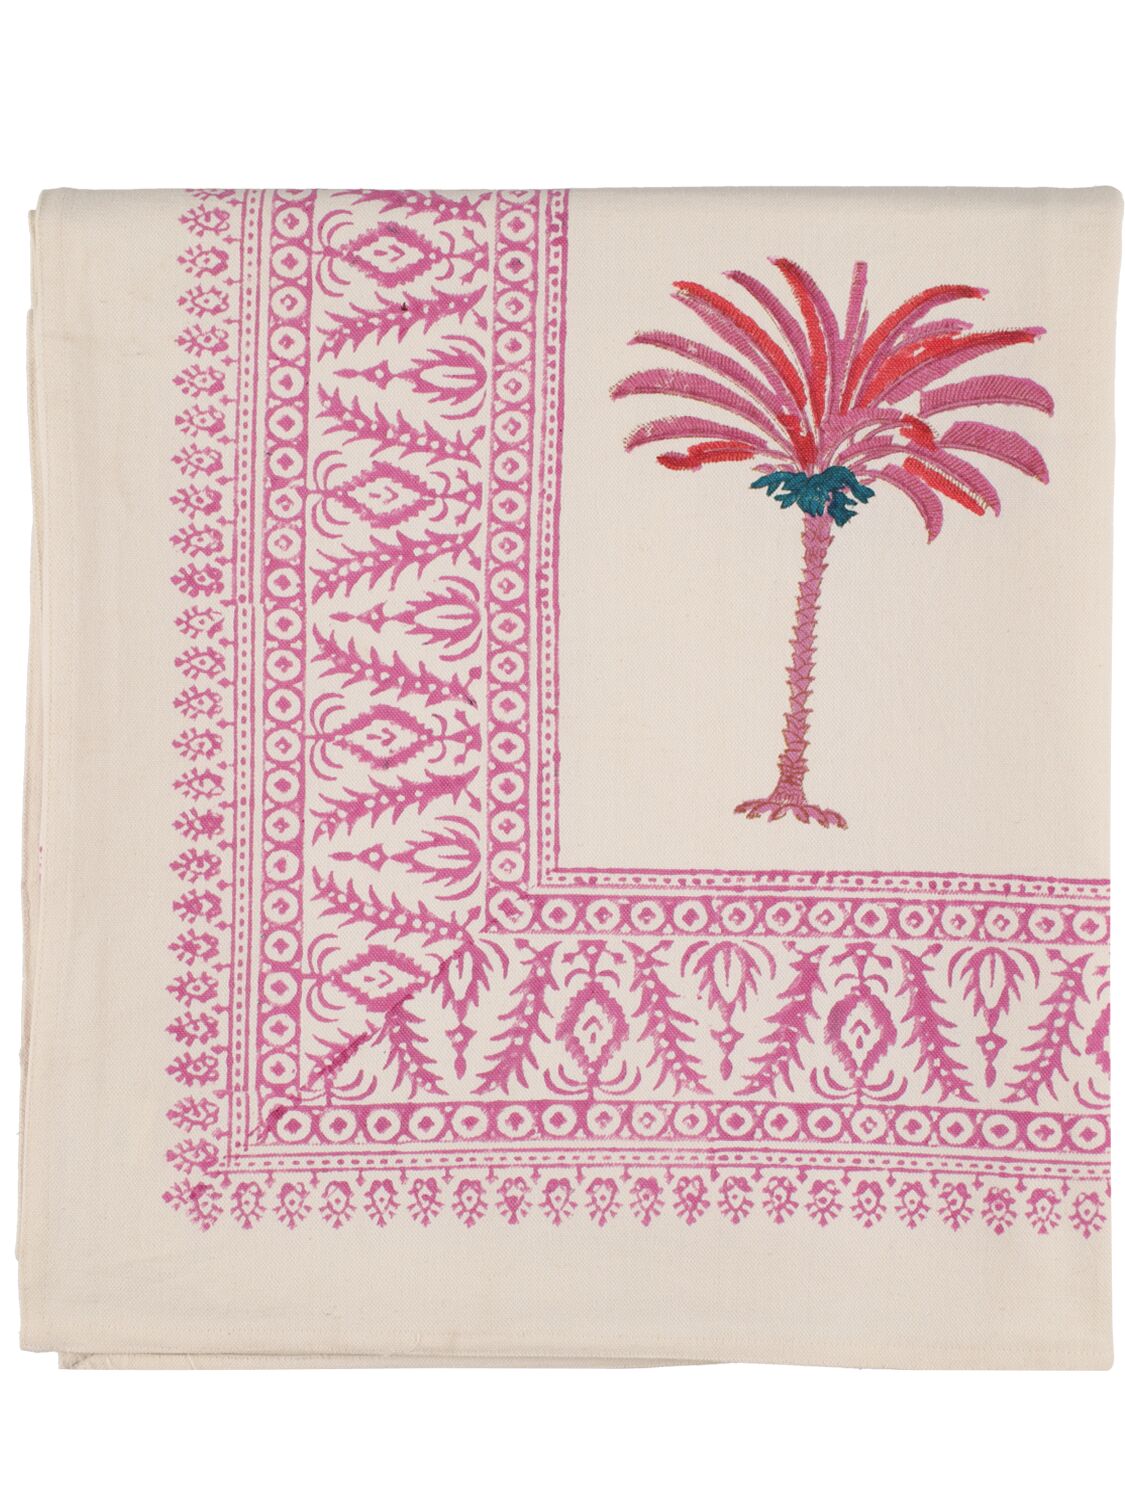 Les Ottomans Handprinted Cotton Tablecloth In Pink